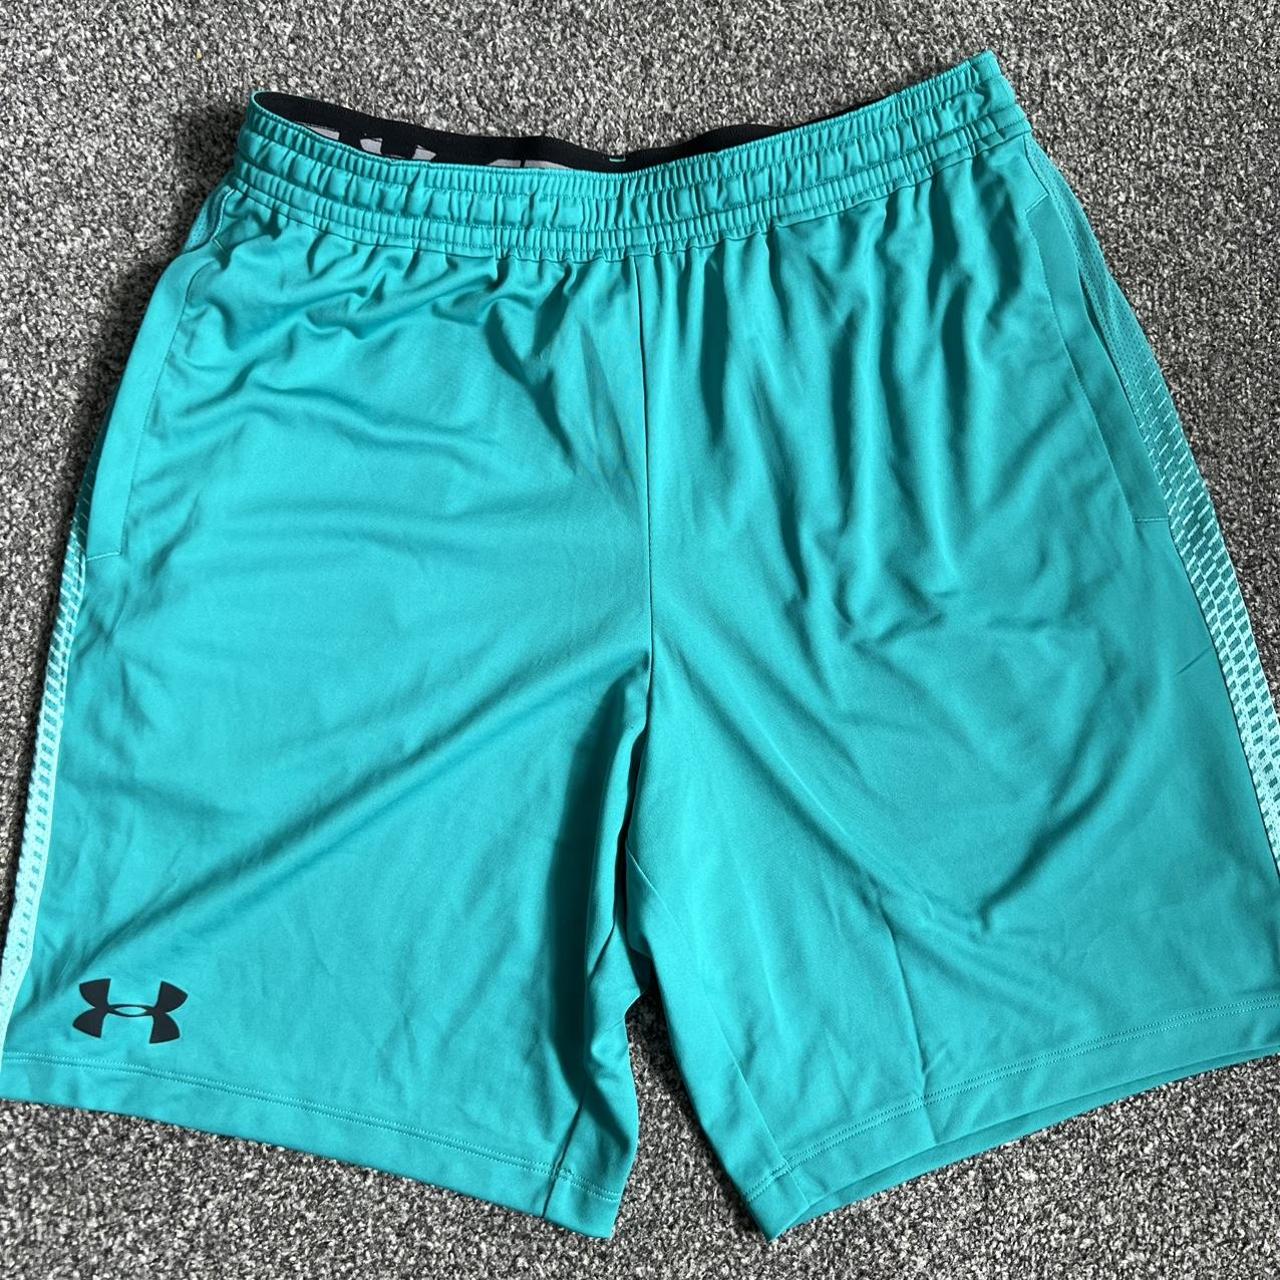 Under Armour Shorts Brand New Without Tags Size... - Depop